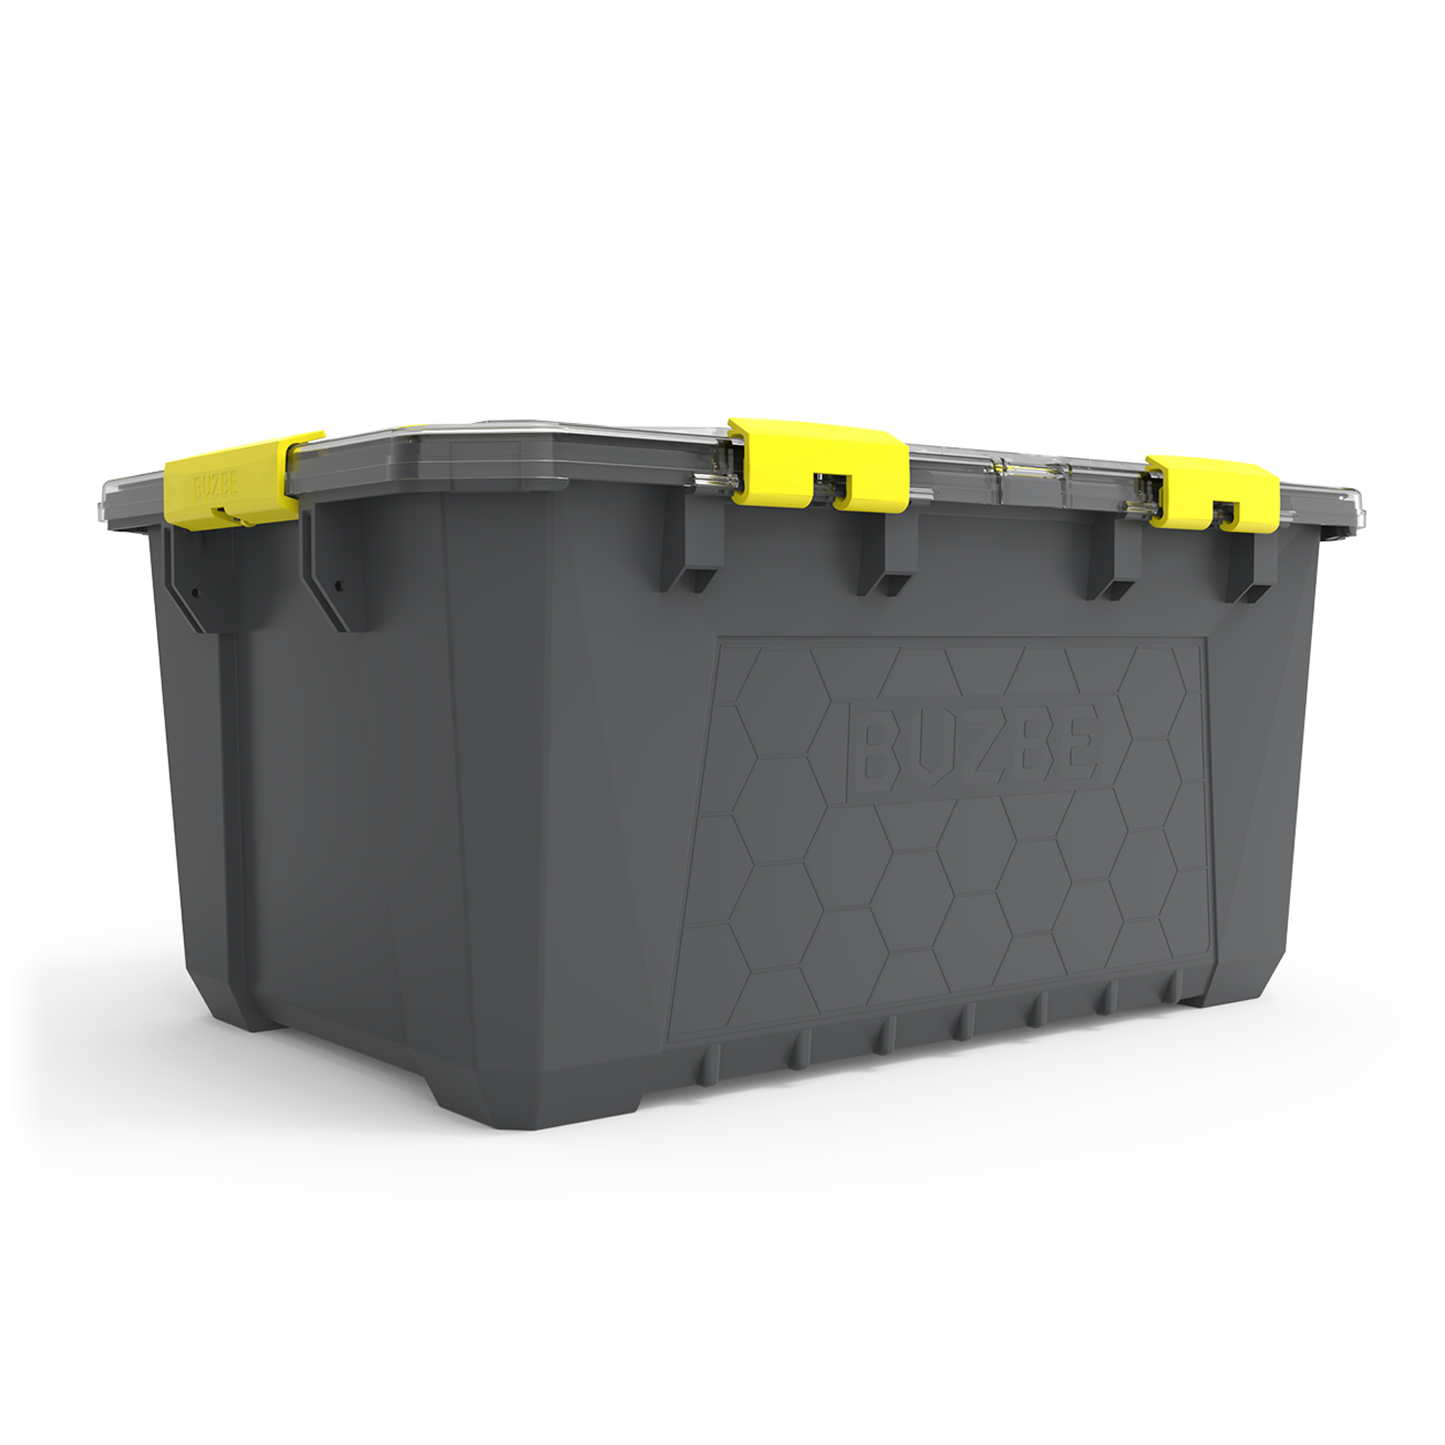 Pack of 3 - Hive 26 Modular Gear Case